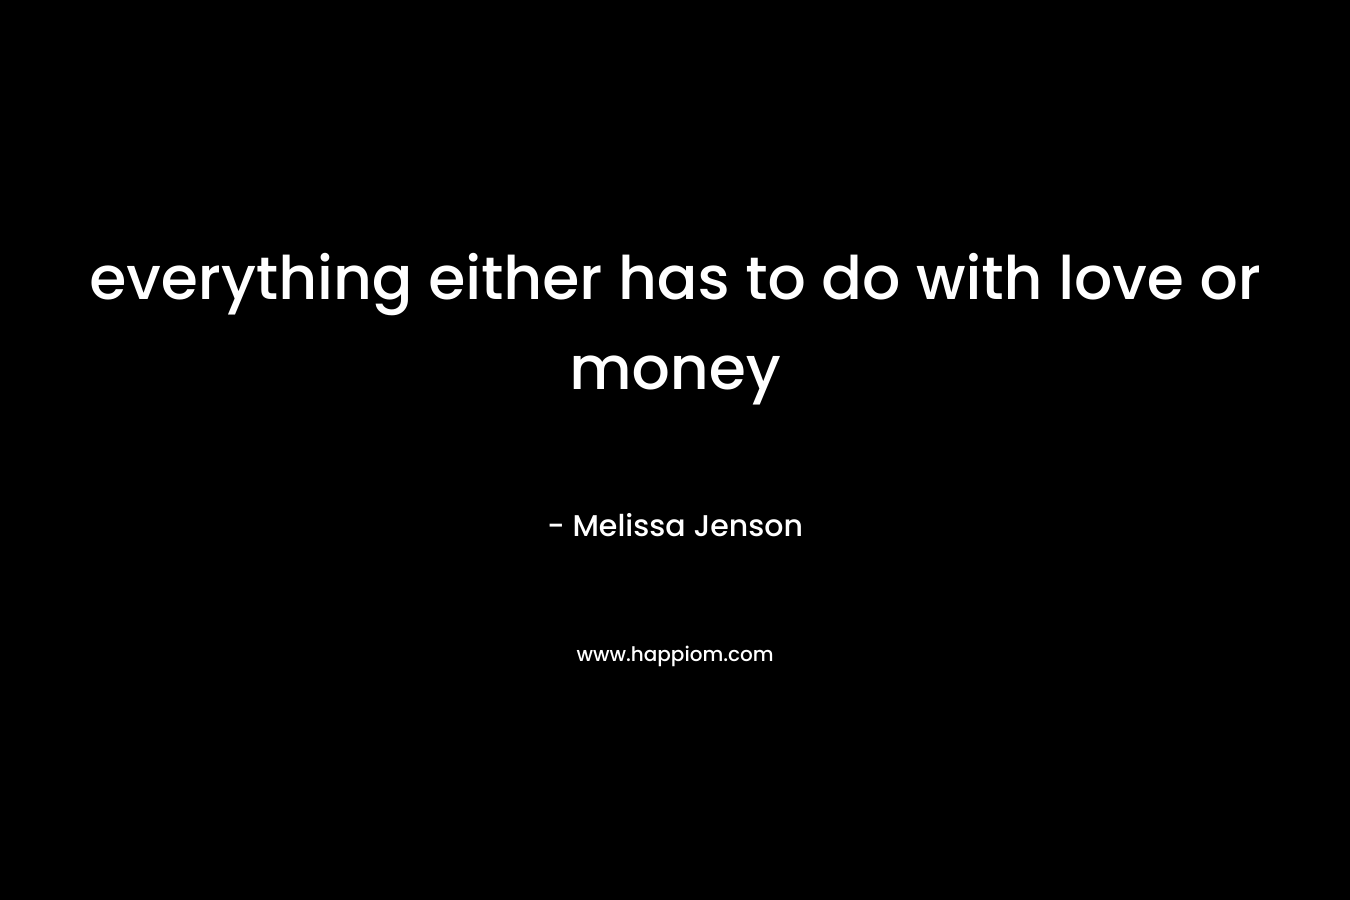 everything either has to do with love or money